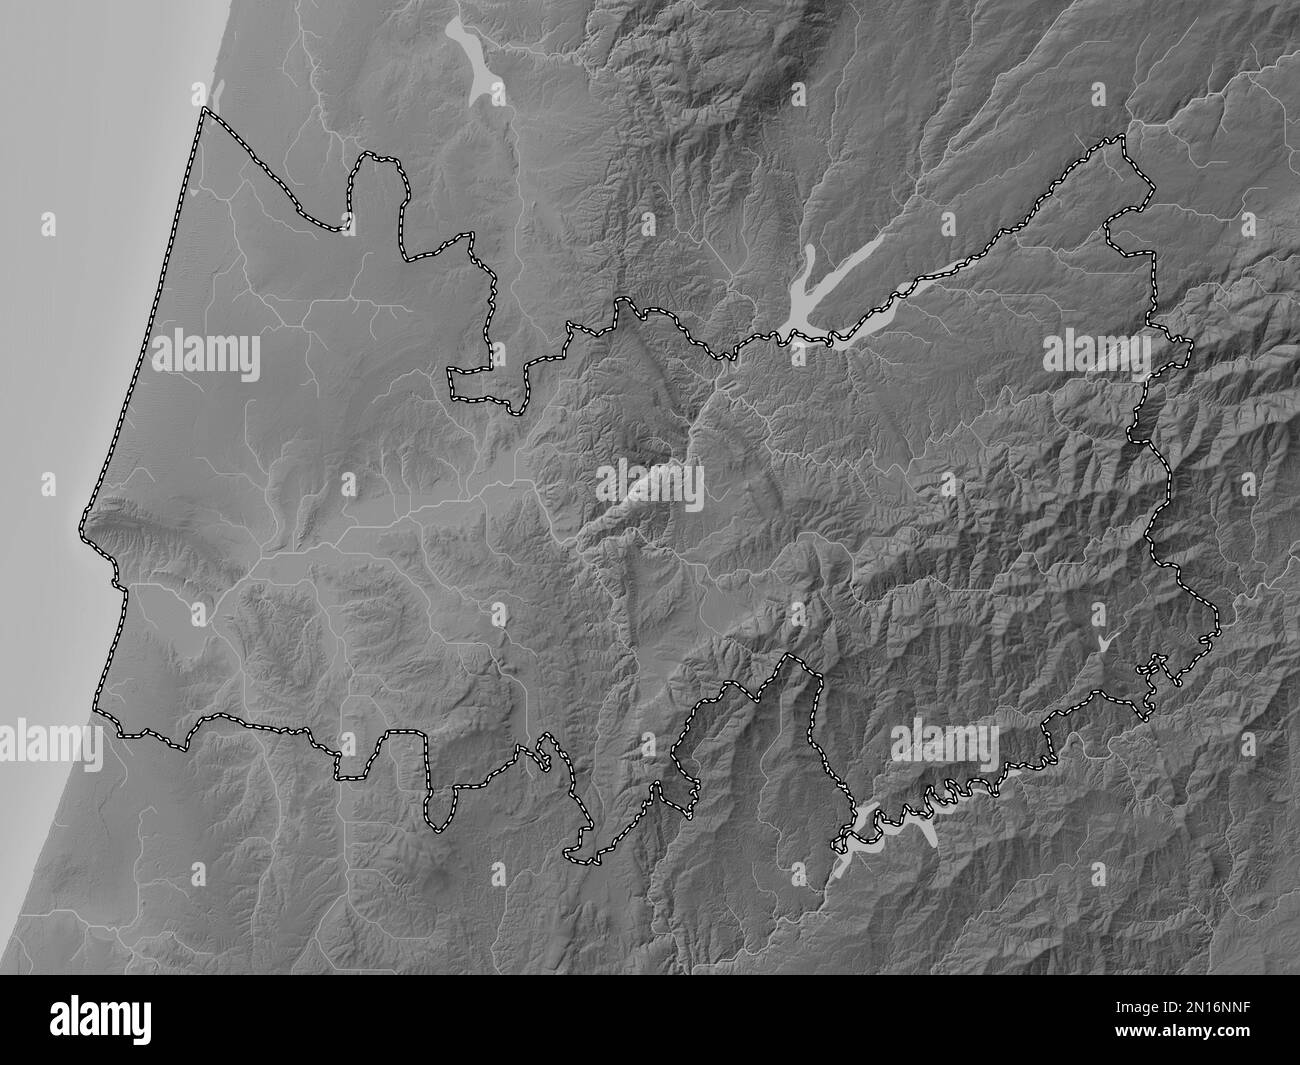 Coimbra, district of Portugal. Grayscale elevation map with lakes and rivers Stock Photo